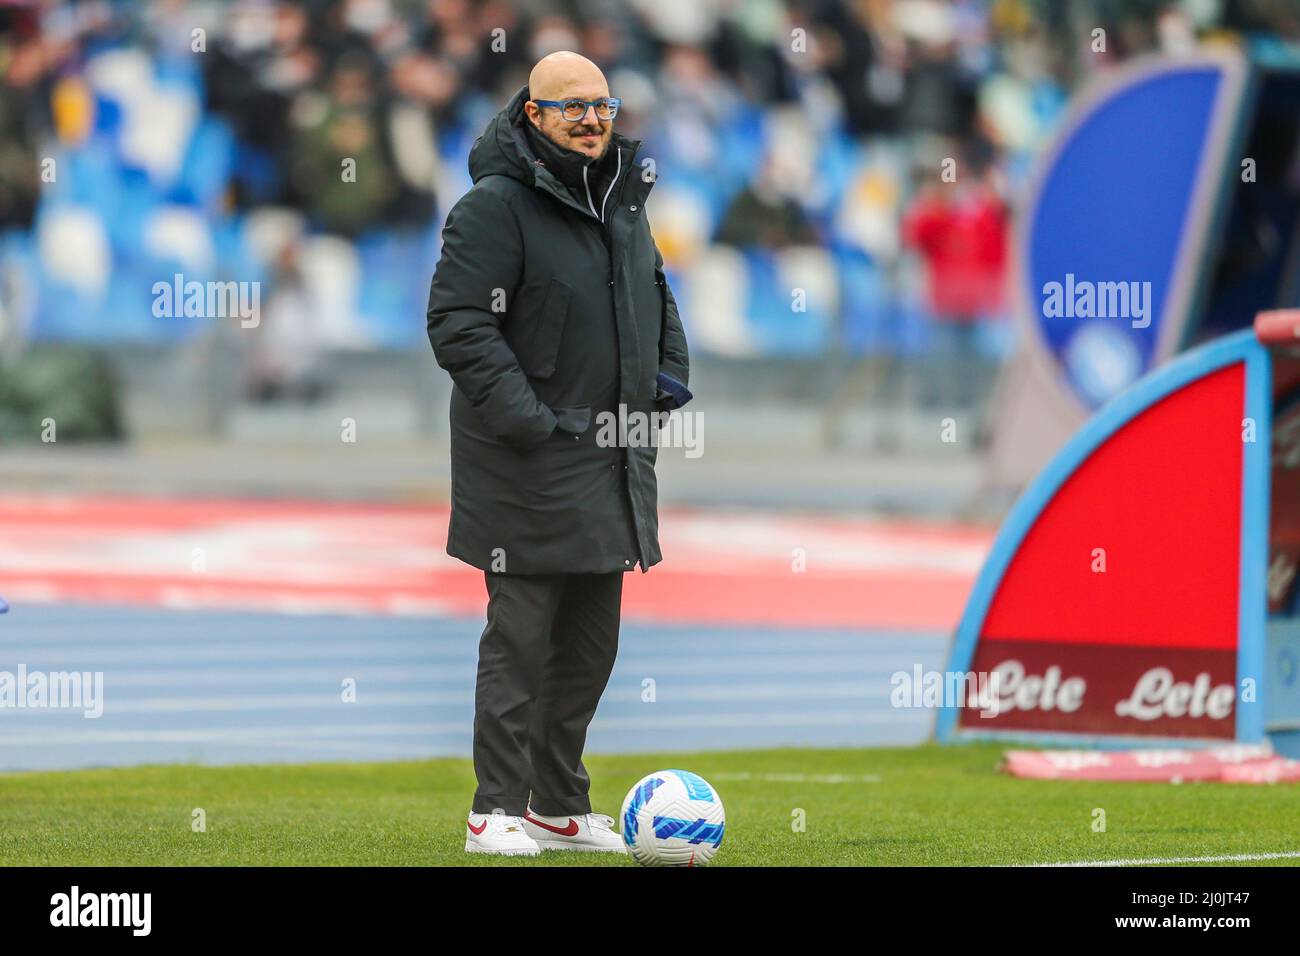 Udinese sporting director Pierpaolo Marino during the Serie A football match between SSC Napoli and Udinese. Napoli won 2-1 Stock Photo